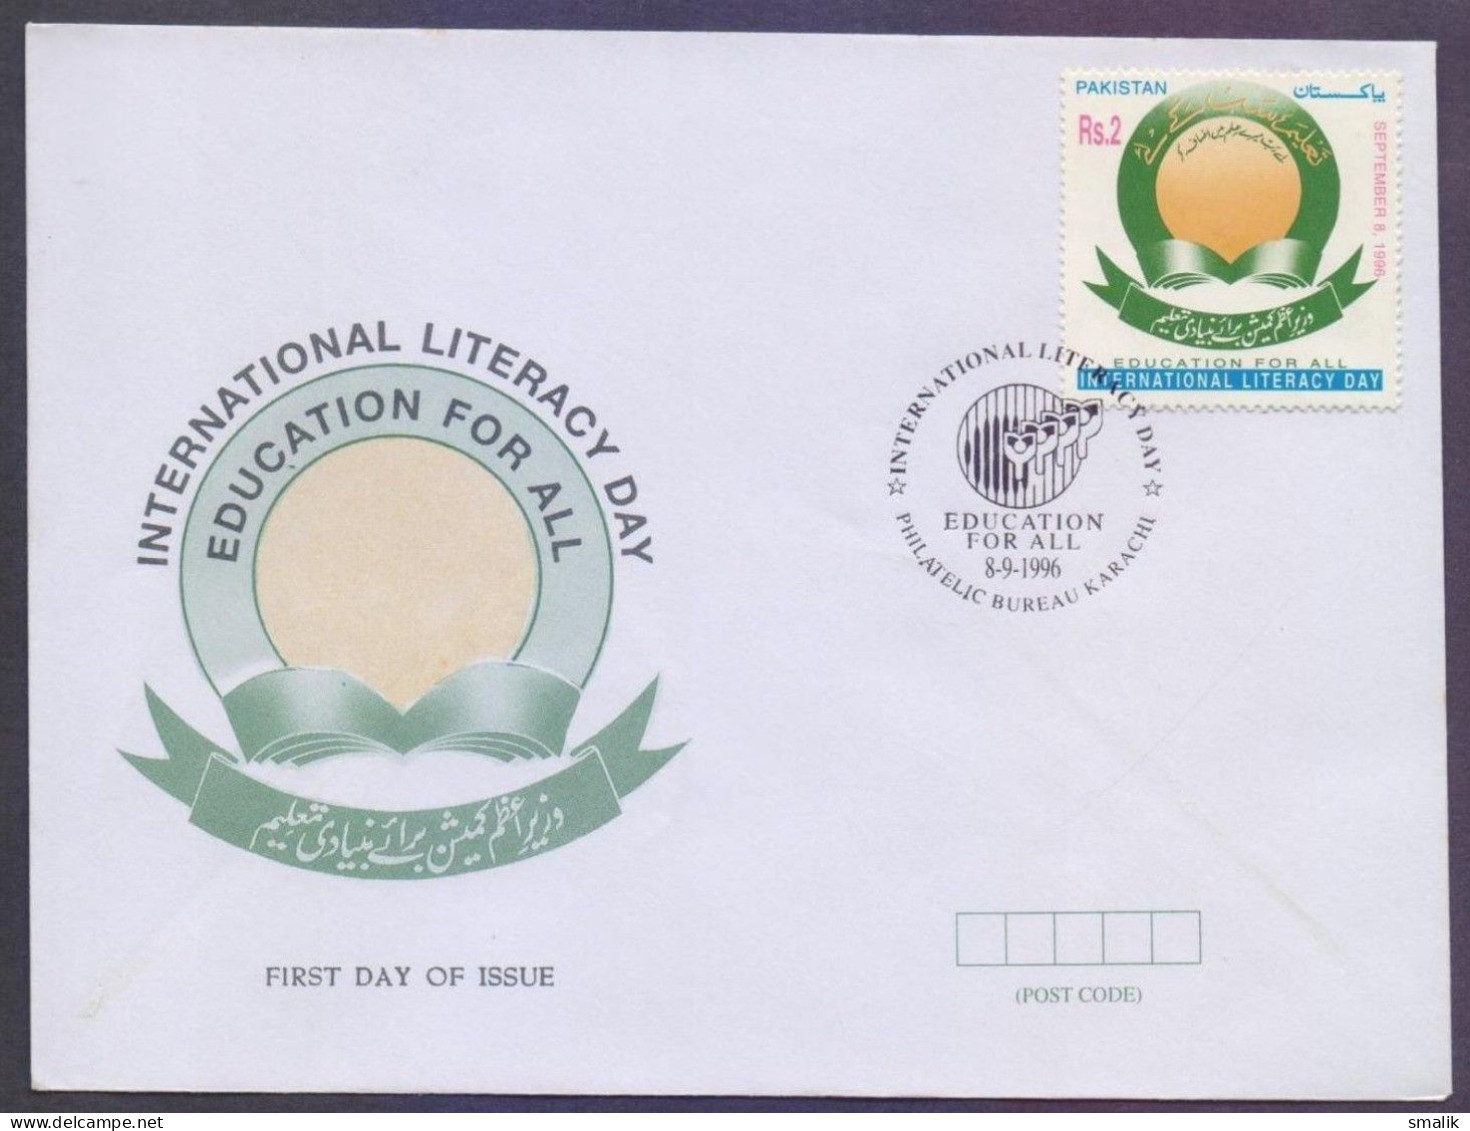 PAKISTAN 1996 FDC - International Literacy Day, Education For All, First Day Cover - Pakistan